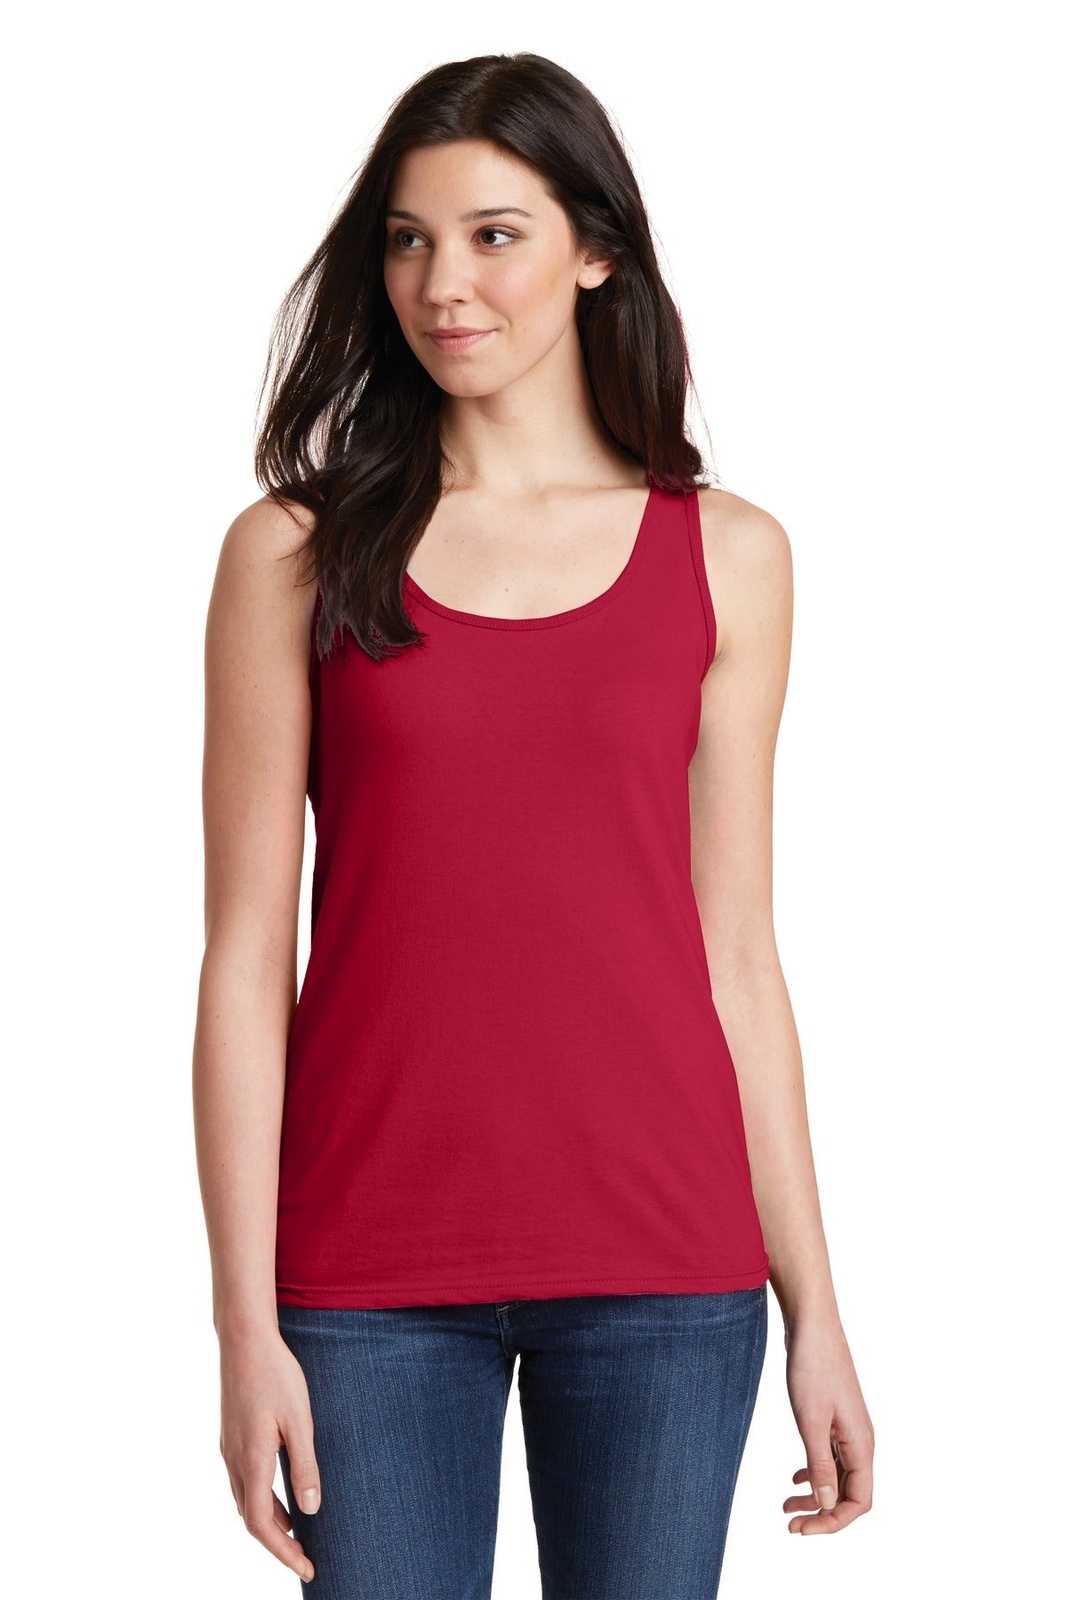 Cherry red tank tops